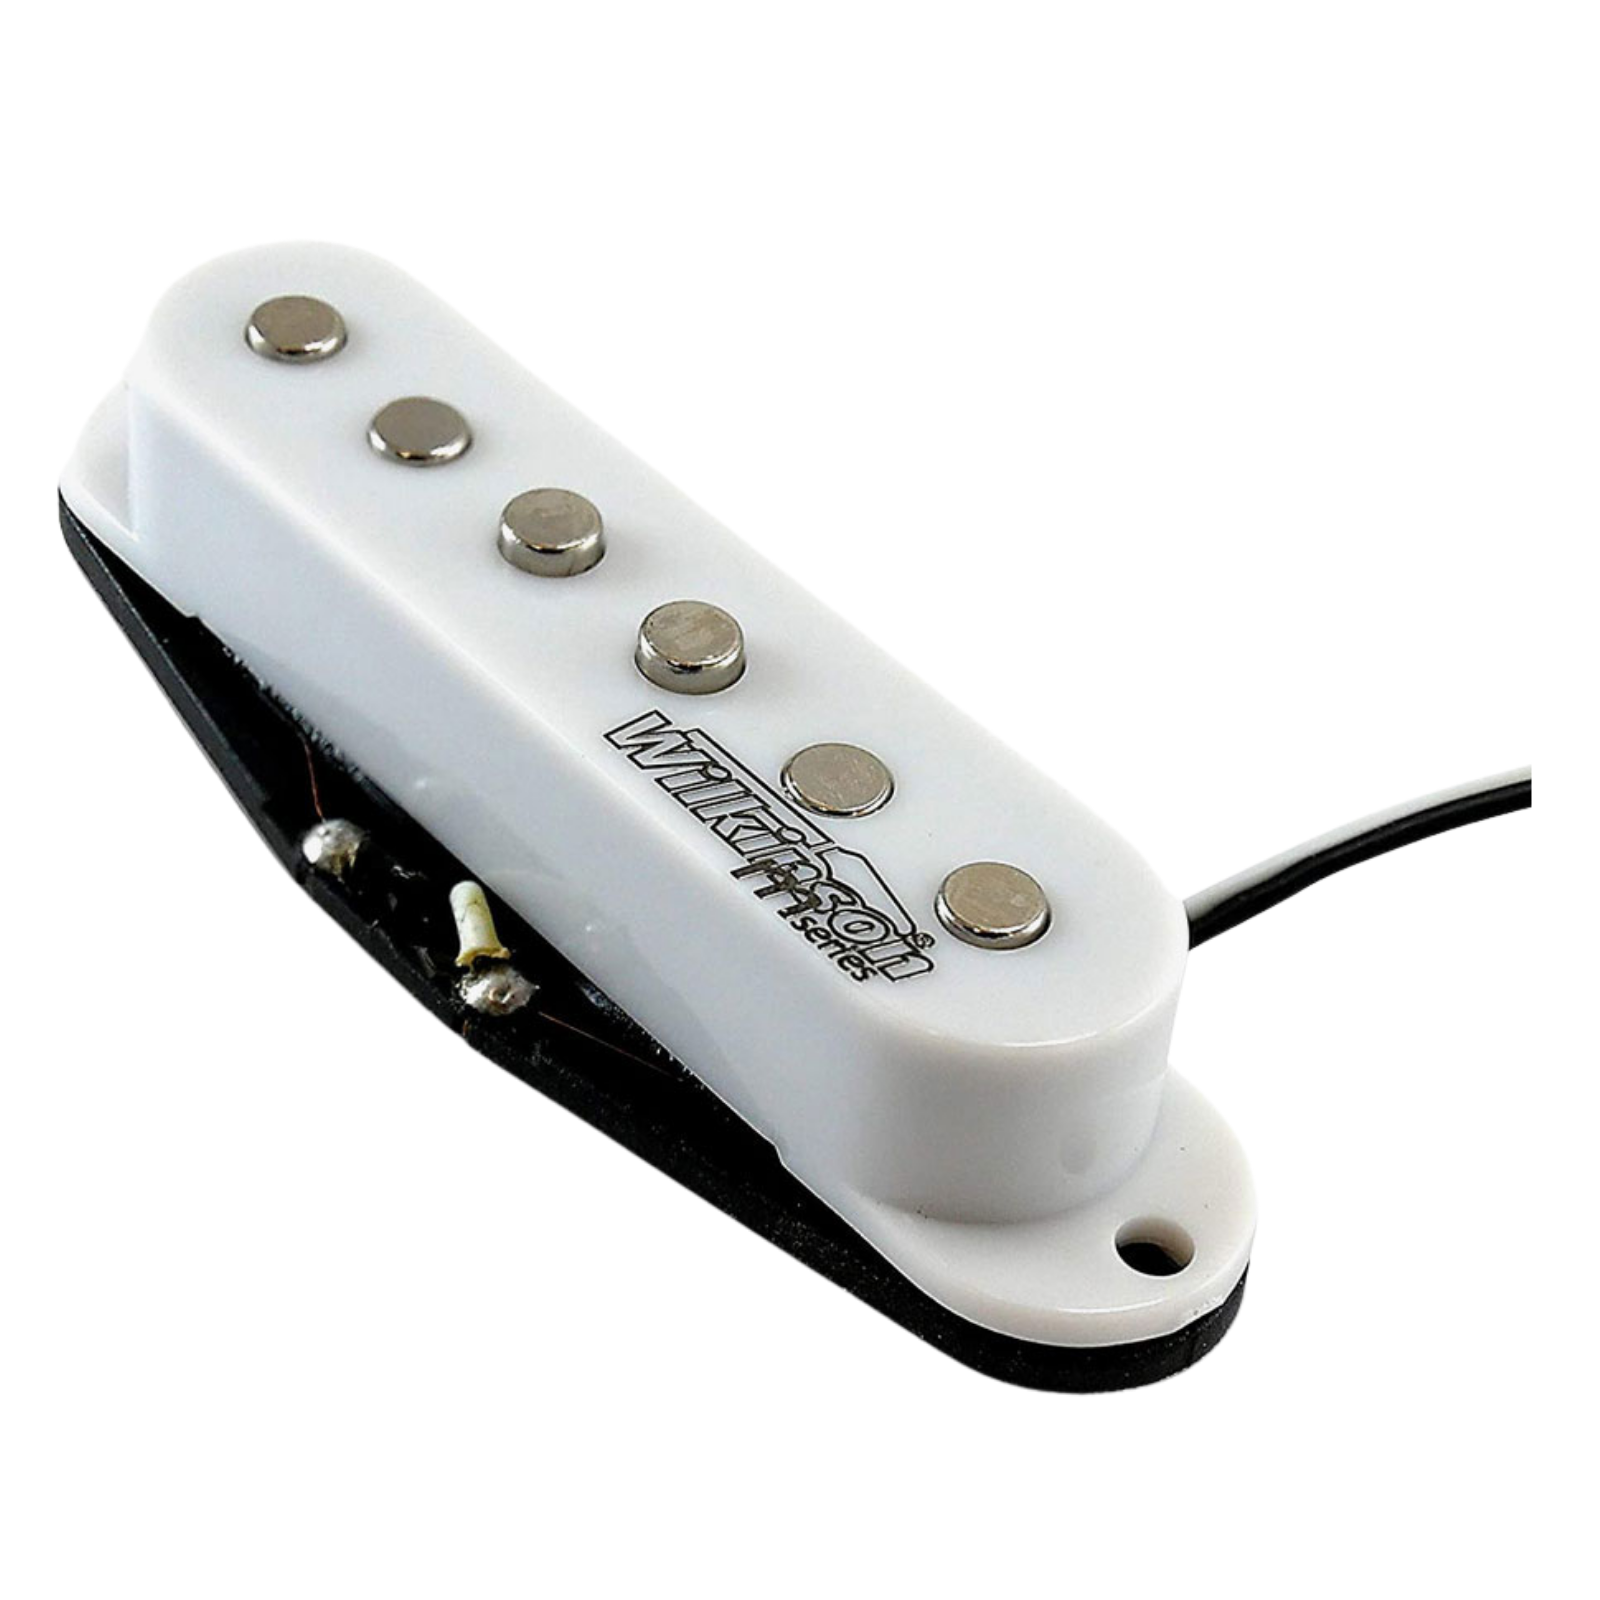 WILKINSON PICKUPS NECK SINGLE COIL WITH LOWGAUSS CERAMIC COLOR WHITE FOR STRATOCASTER ELECTRIC GUITAR, WILKINSON, PICKUPS & PARTS, wilkinson-pickups-parts-wovsn, ZOSO MUSIC SDN BHD